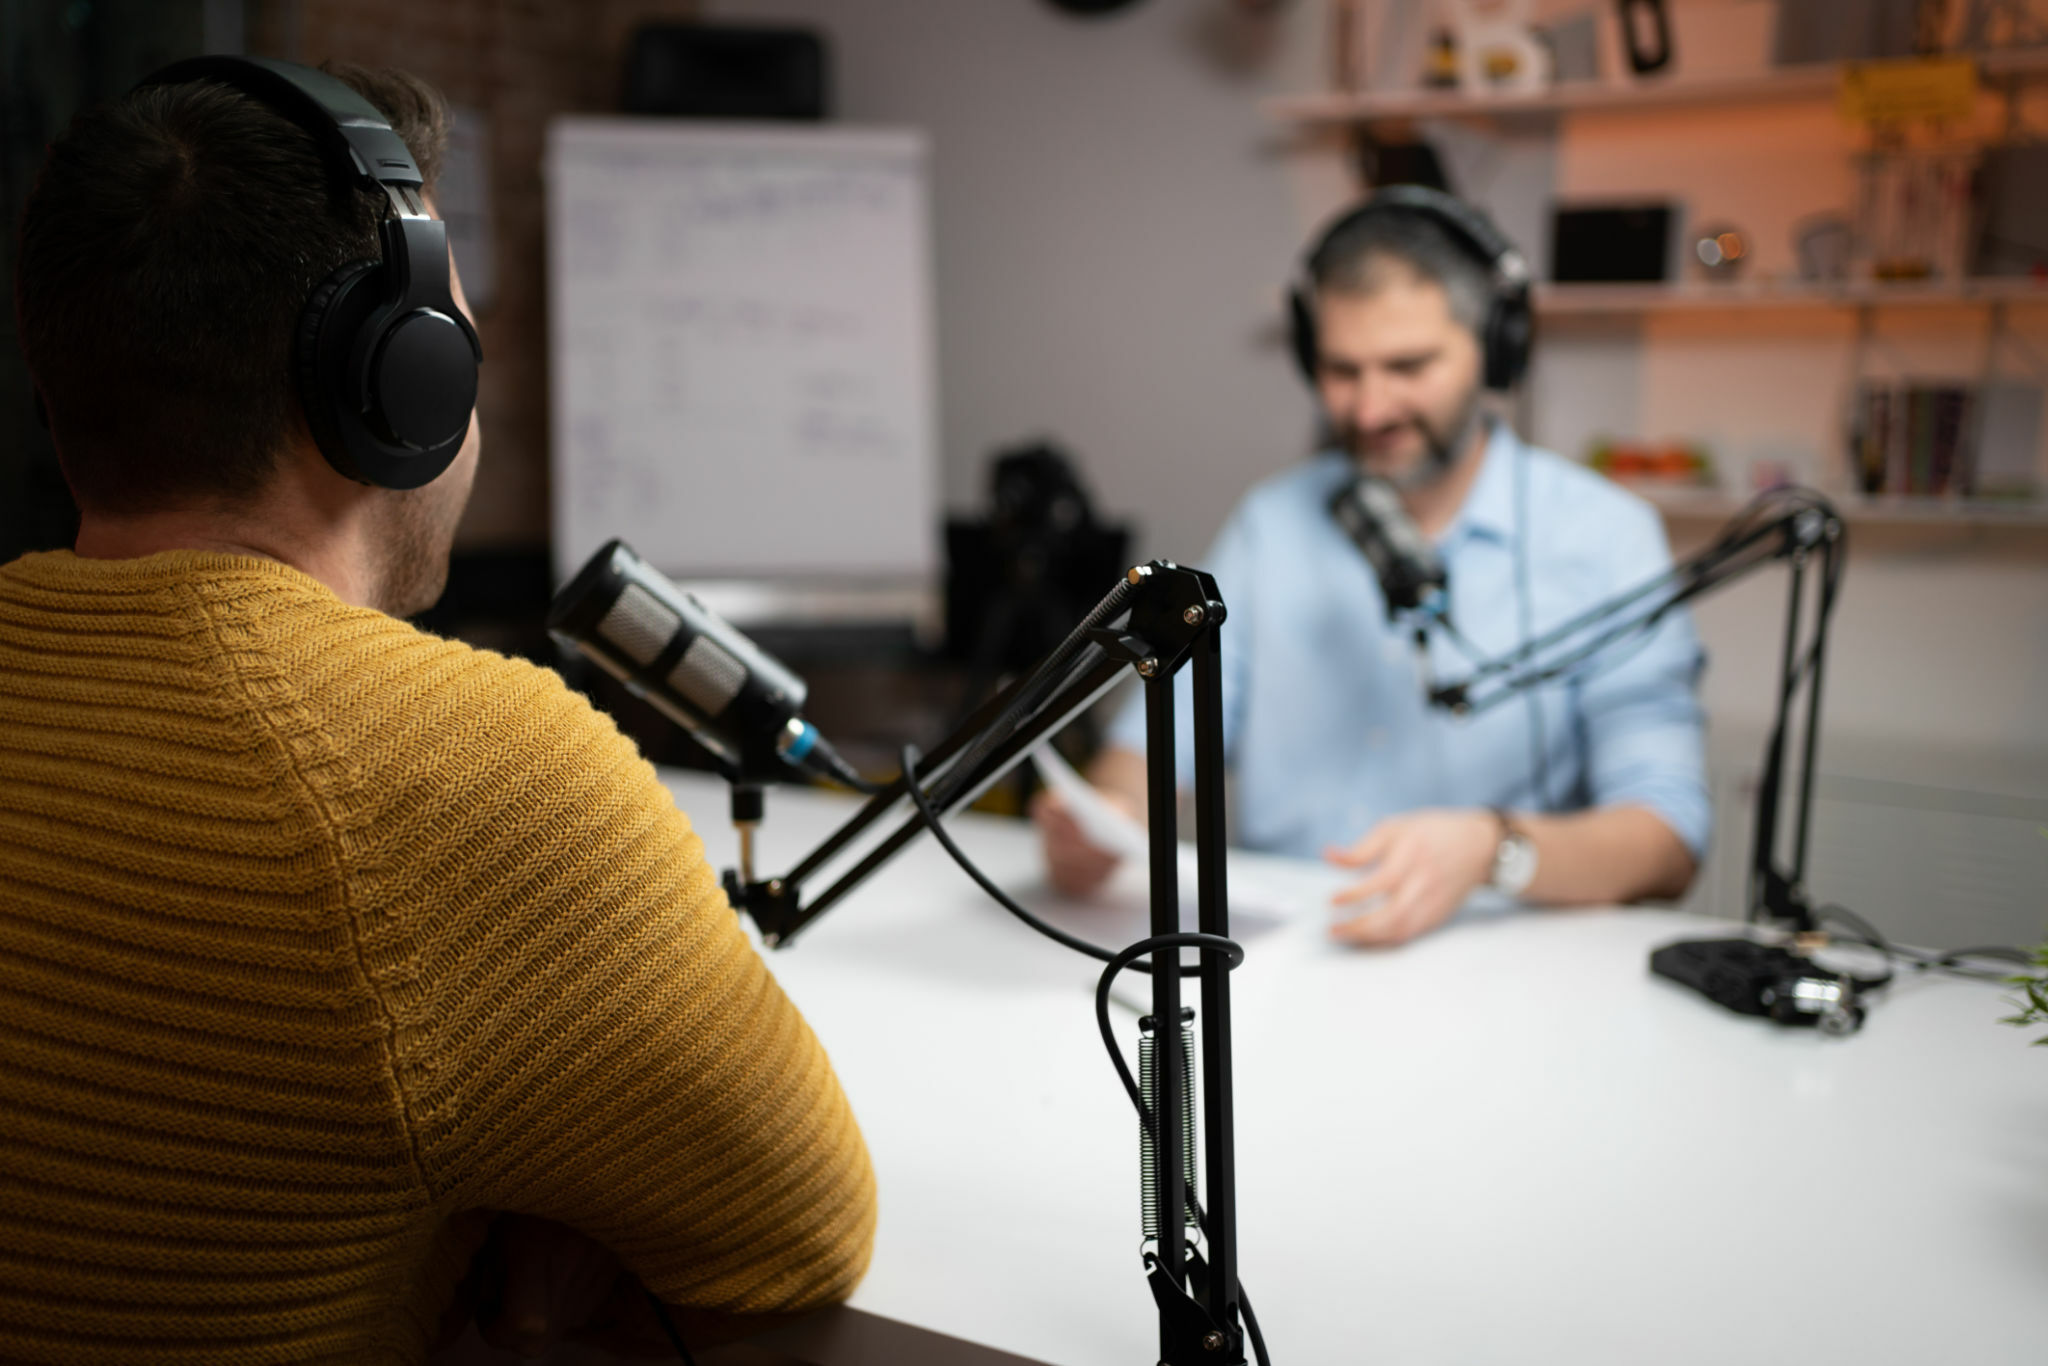 Tune into new audiences and watch your influence, authority, and profits crescendo when you leverage podcast platforms to showcase your brand. Be seen and heard!